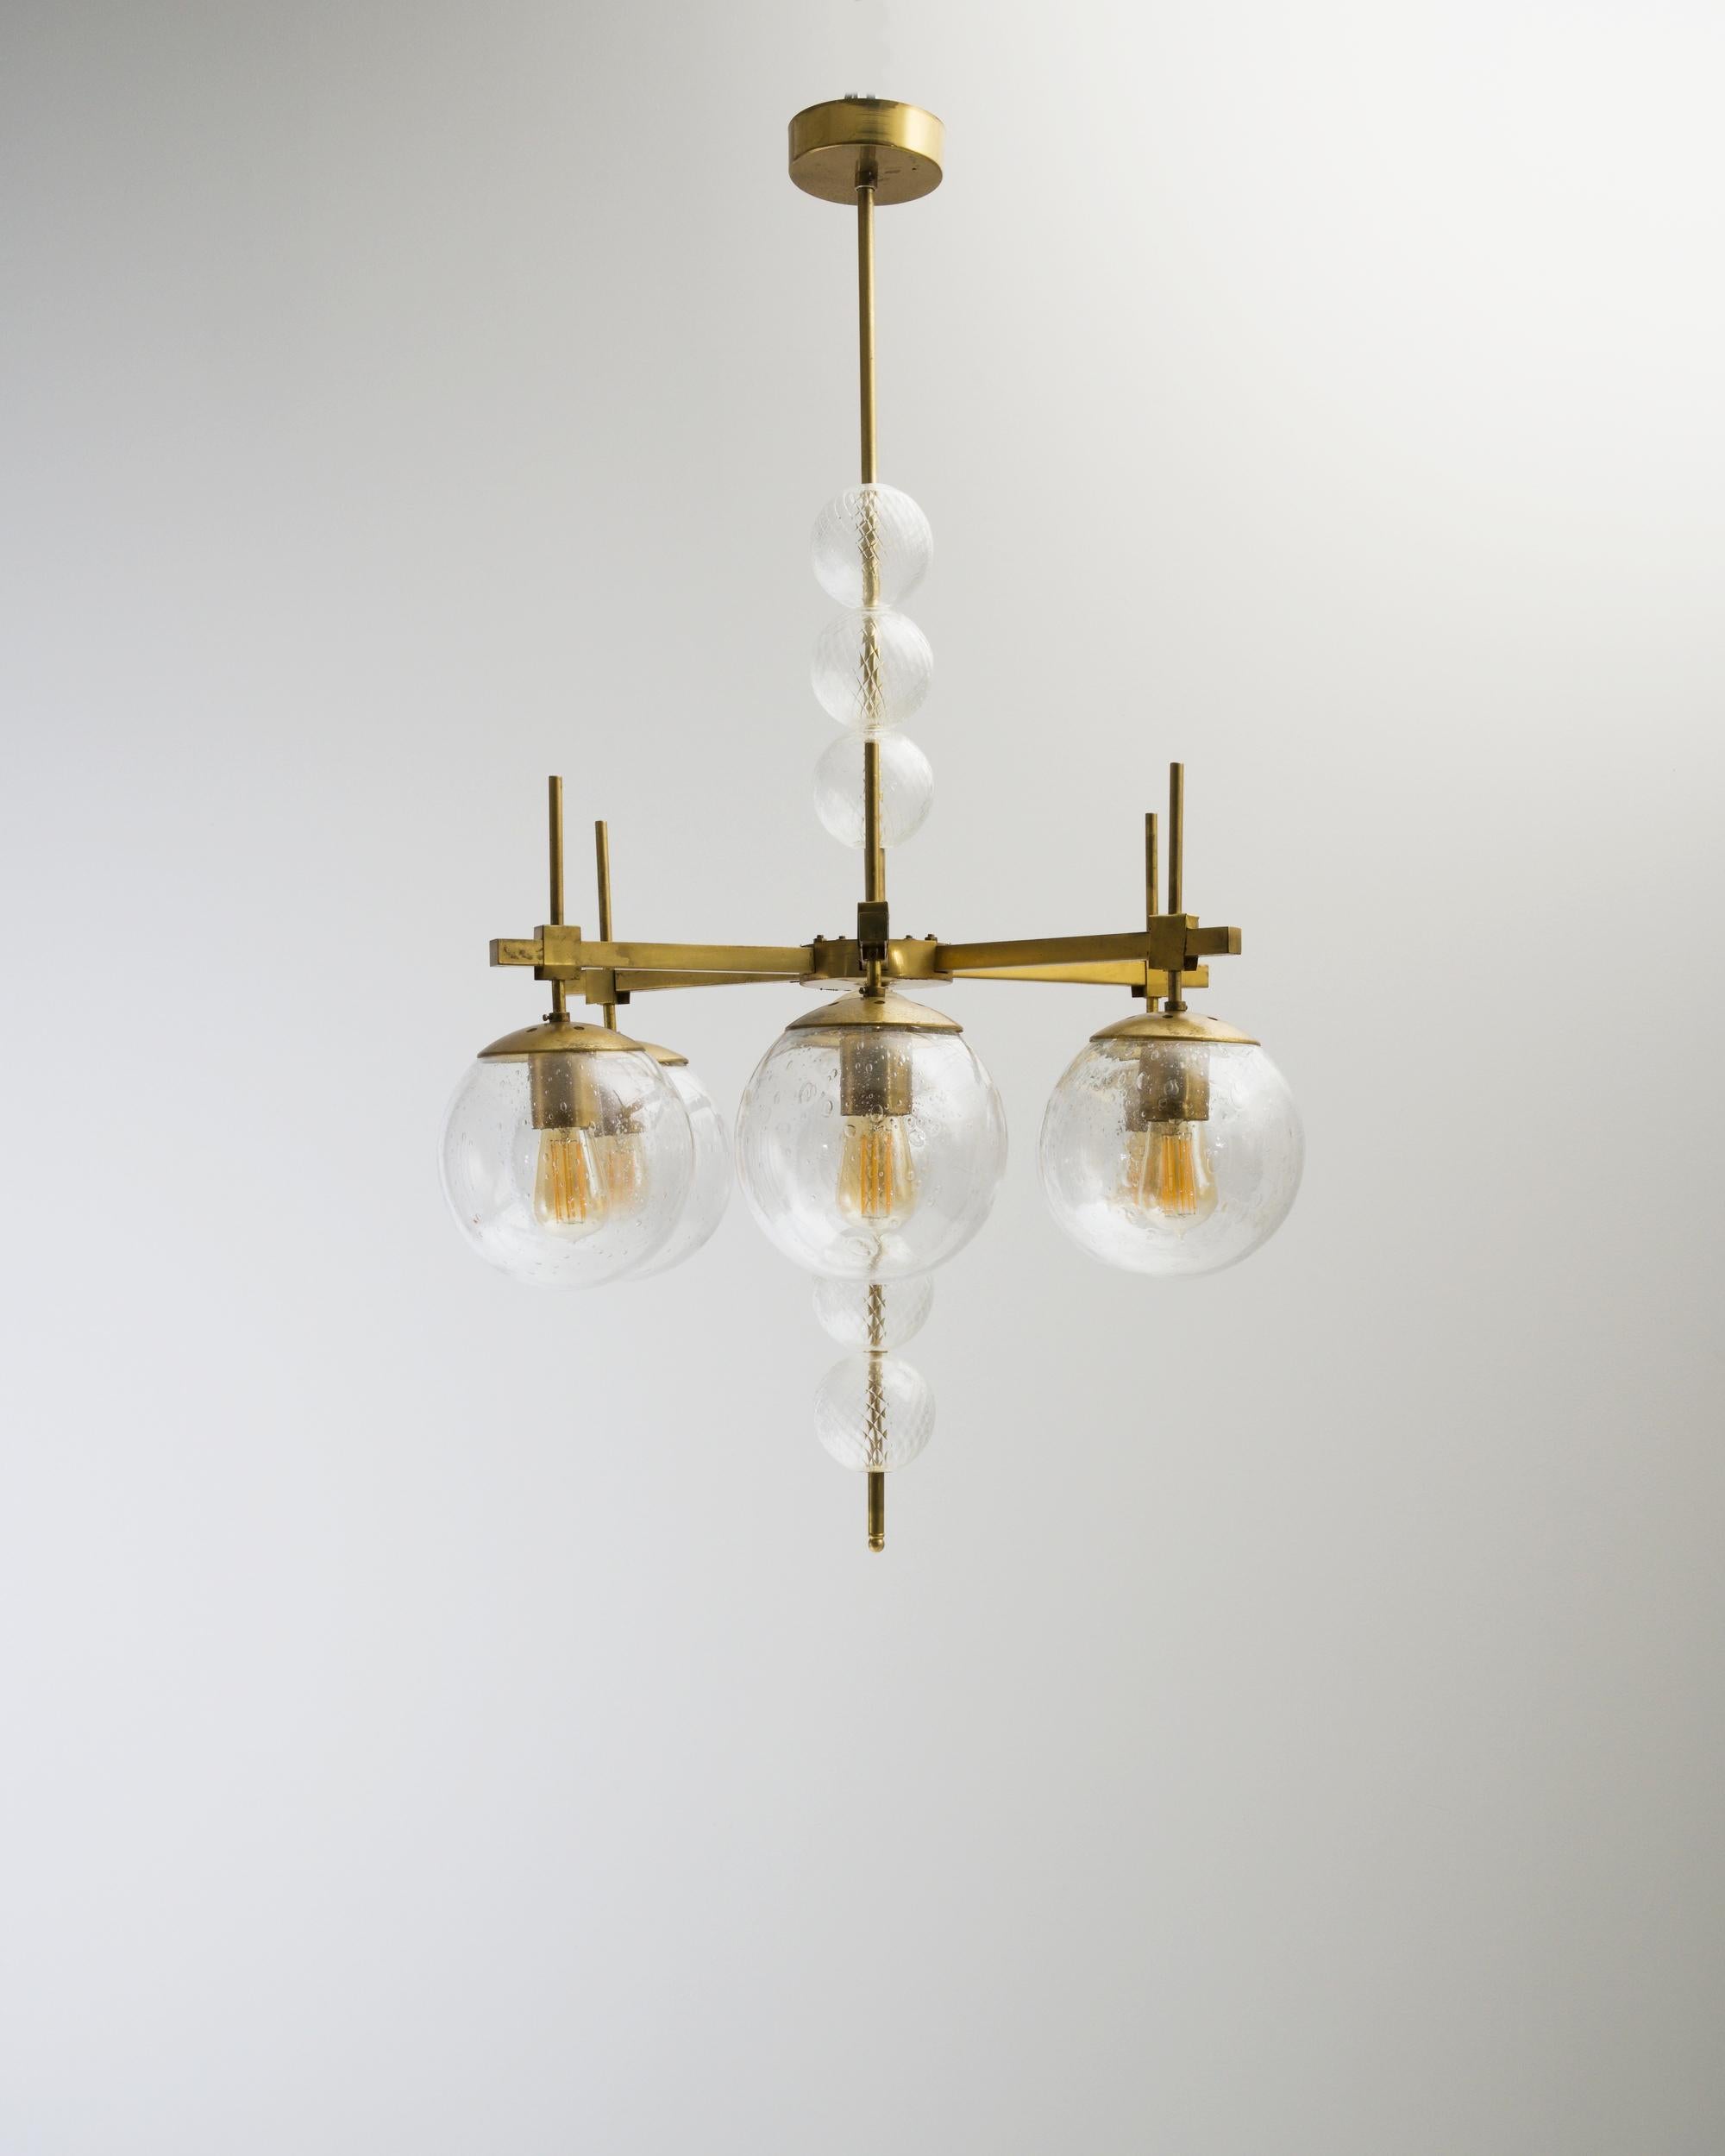 A metal chandelier created in the former Czechoslovakia circa 1970 A unique blend of both mid-century and Art Deco sensibilities, this chandelier combines a sleek construction with a flare for the ornamental. The glass globes that line its center